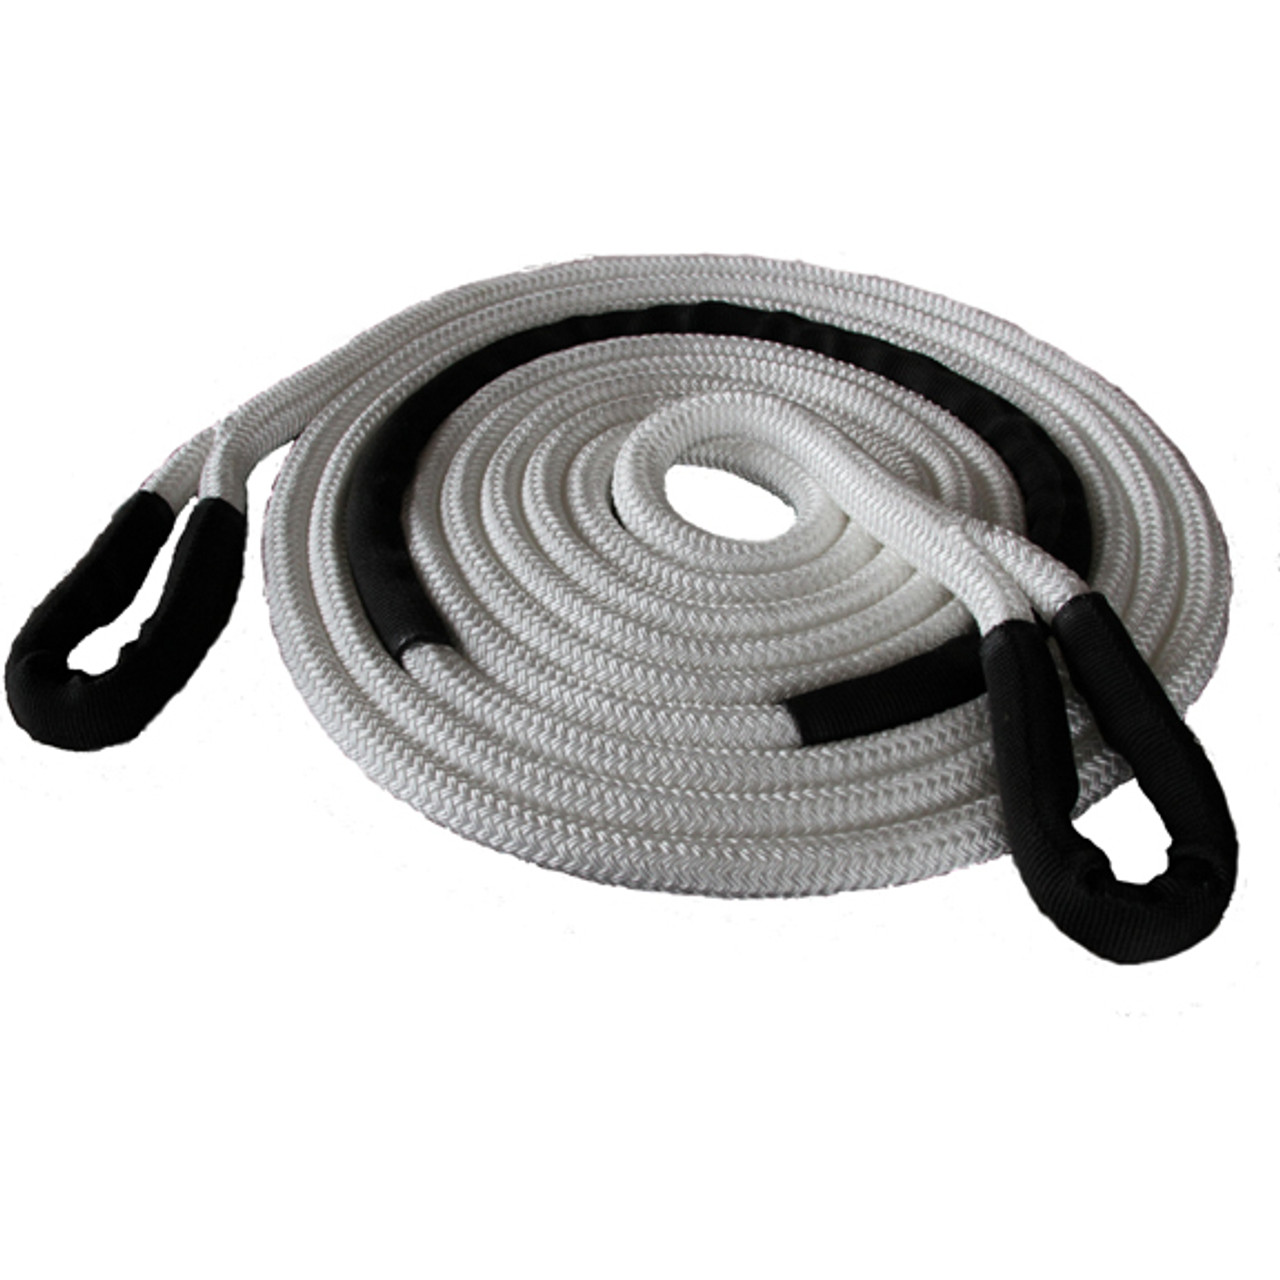 2 Kinetic Recovery Rope (131,500 lb MTS, 43,834 lb WLL) - ASR Offroad